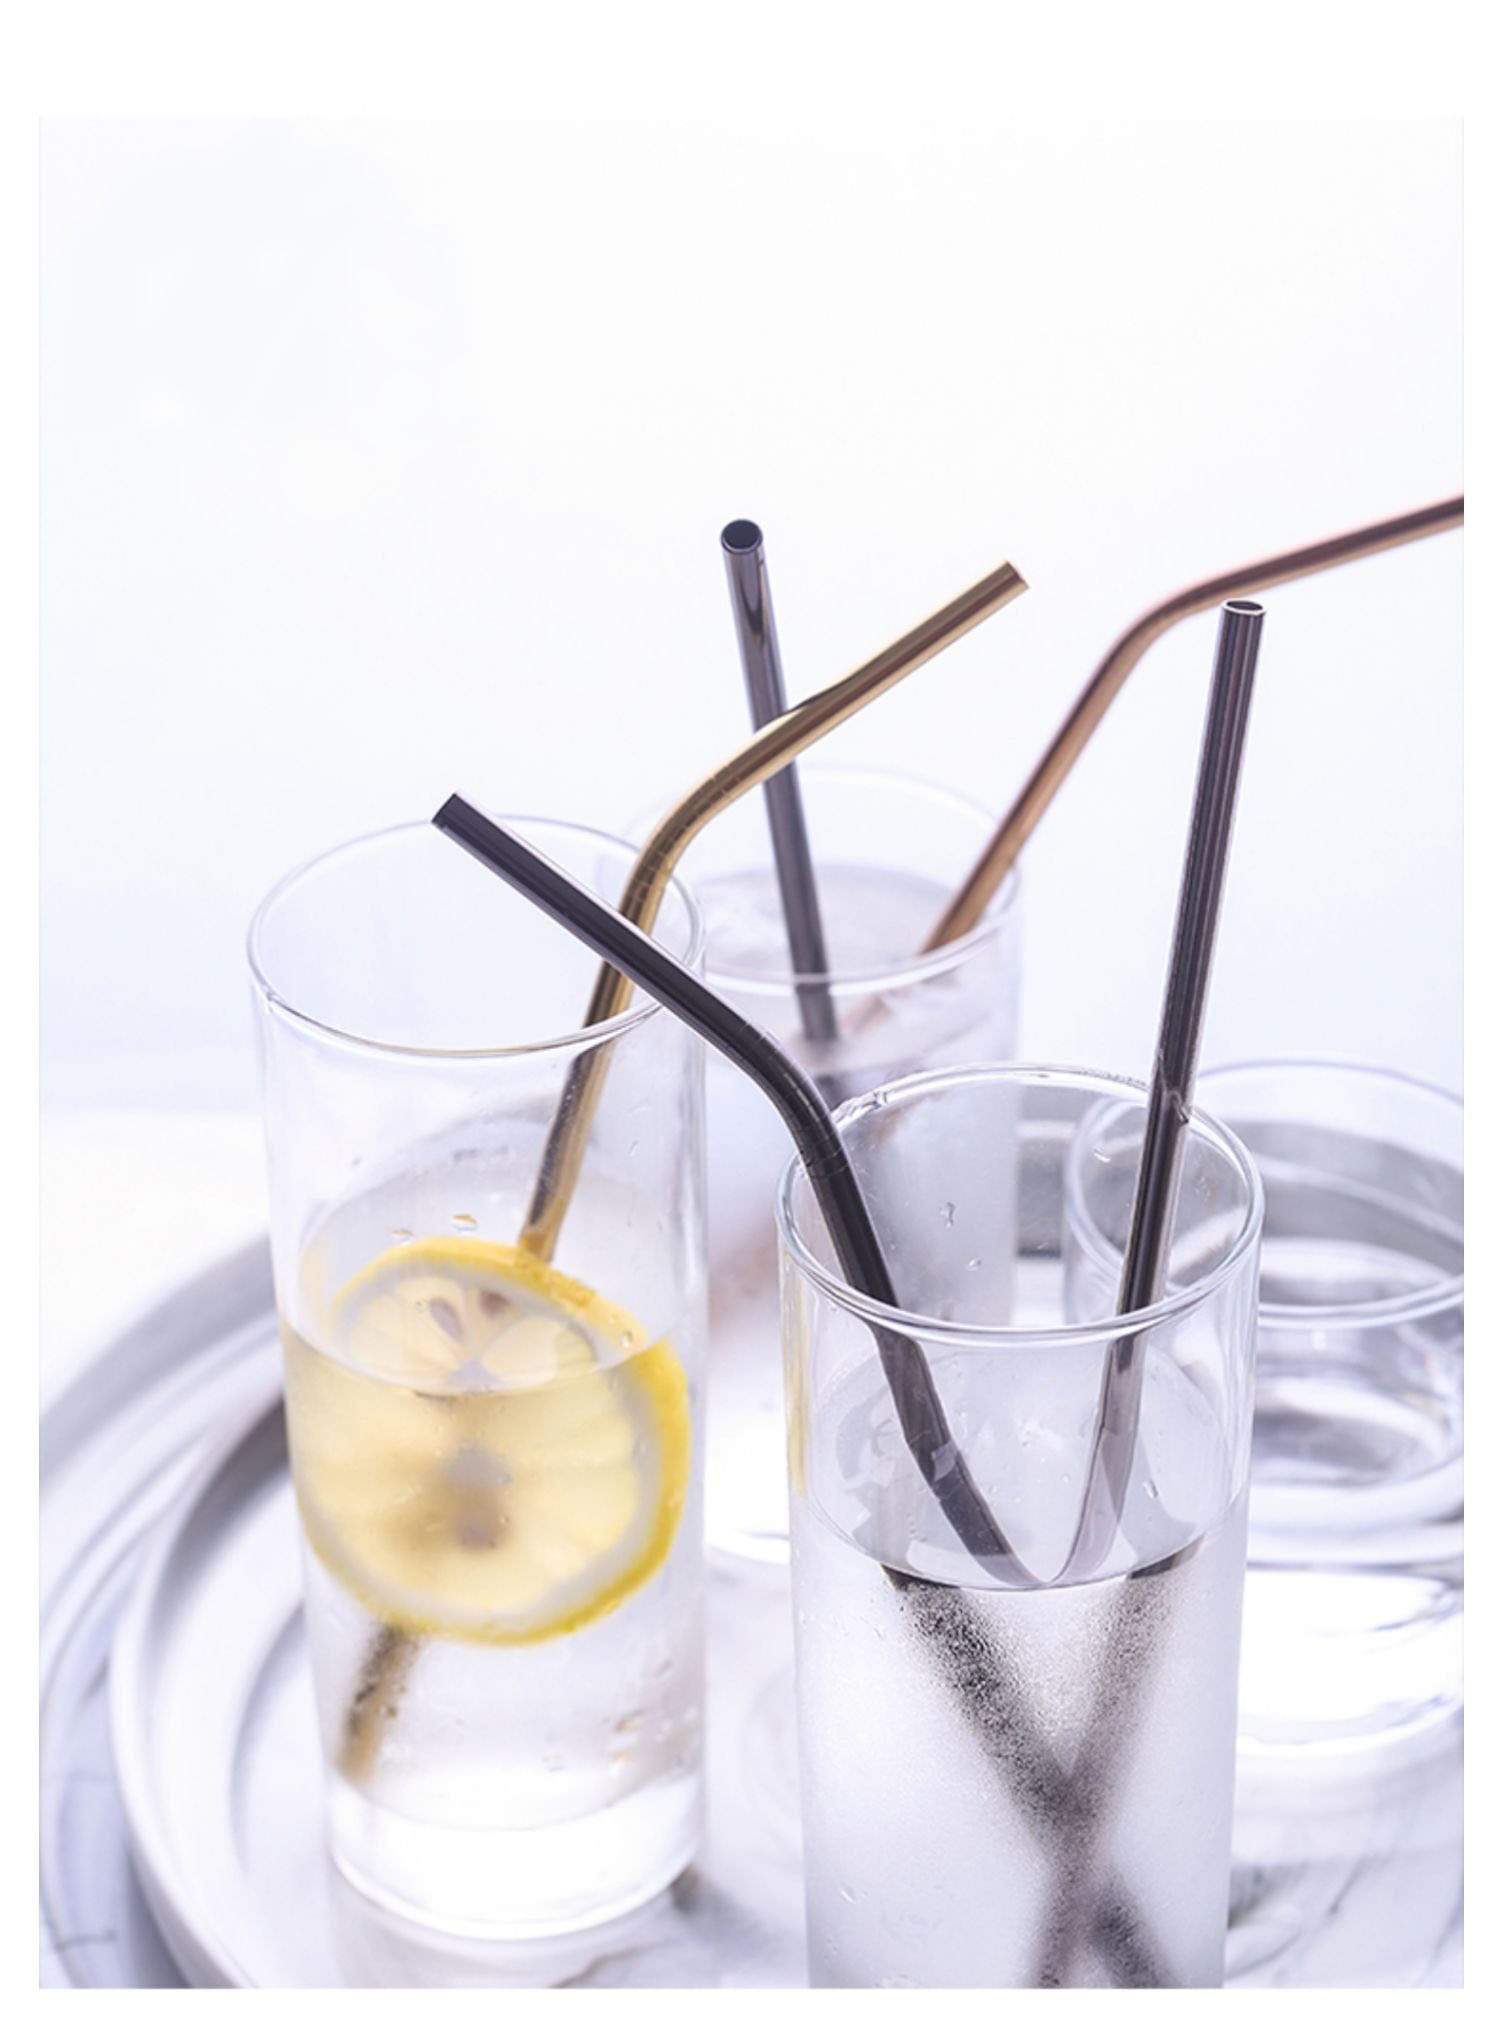 Helms Store Homewares Curved Stainless Steel Reusable Straw (Gold and Black)